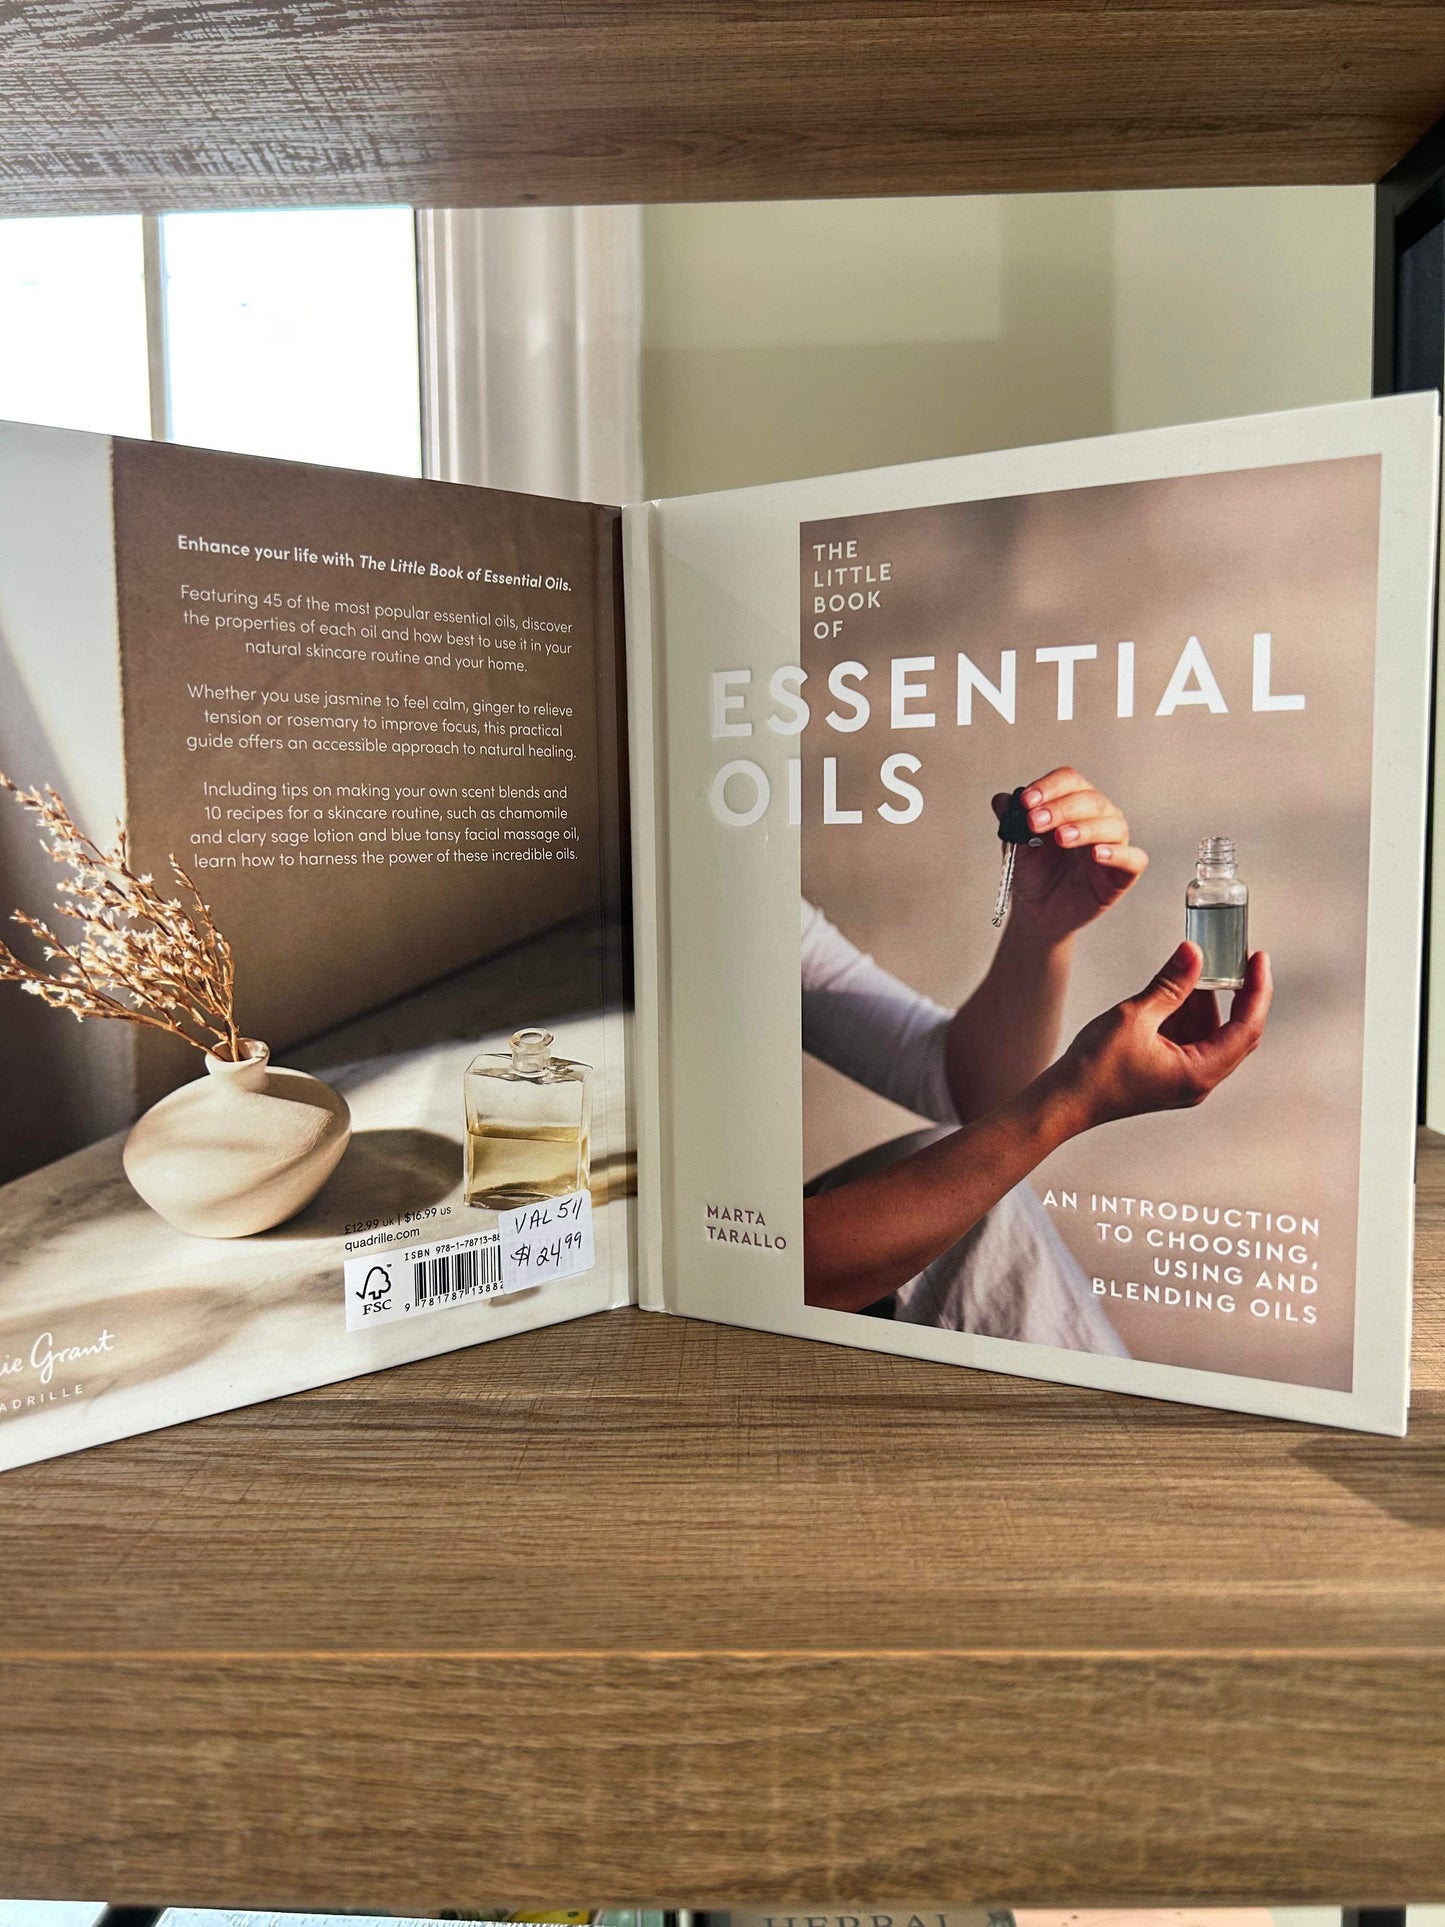 The little book of Essential Oils by Marta Tarallo